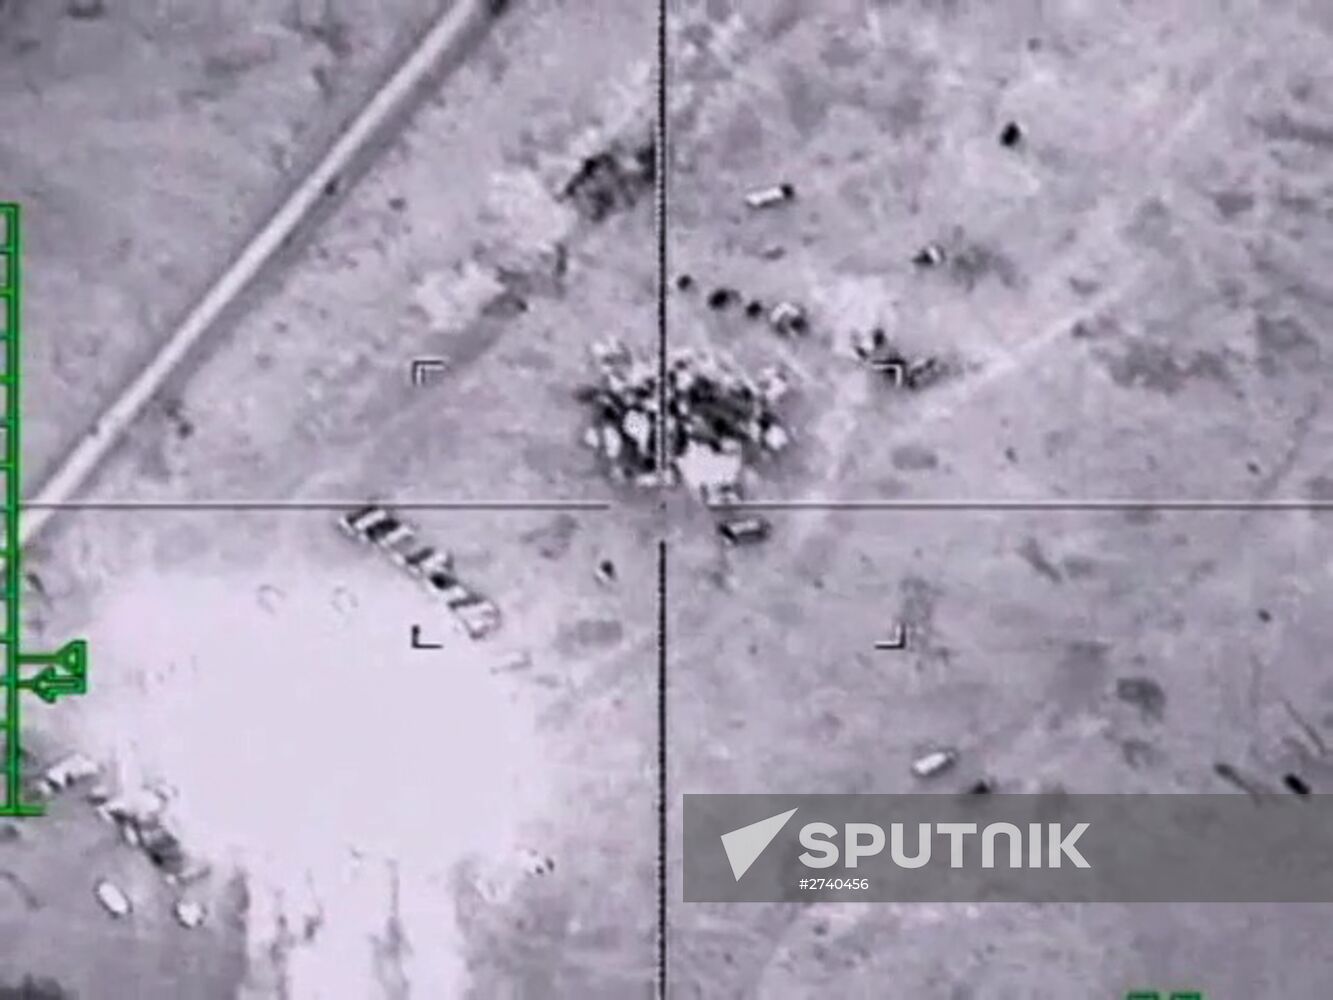 Russian Aerospace Forces strike ISIS positions in Syria